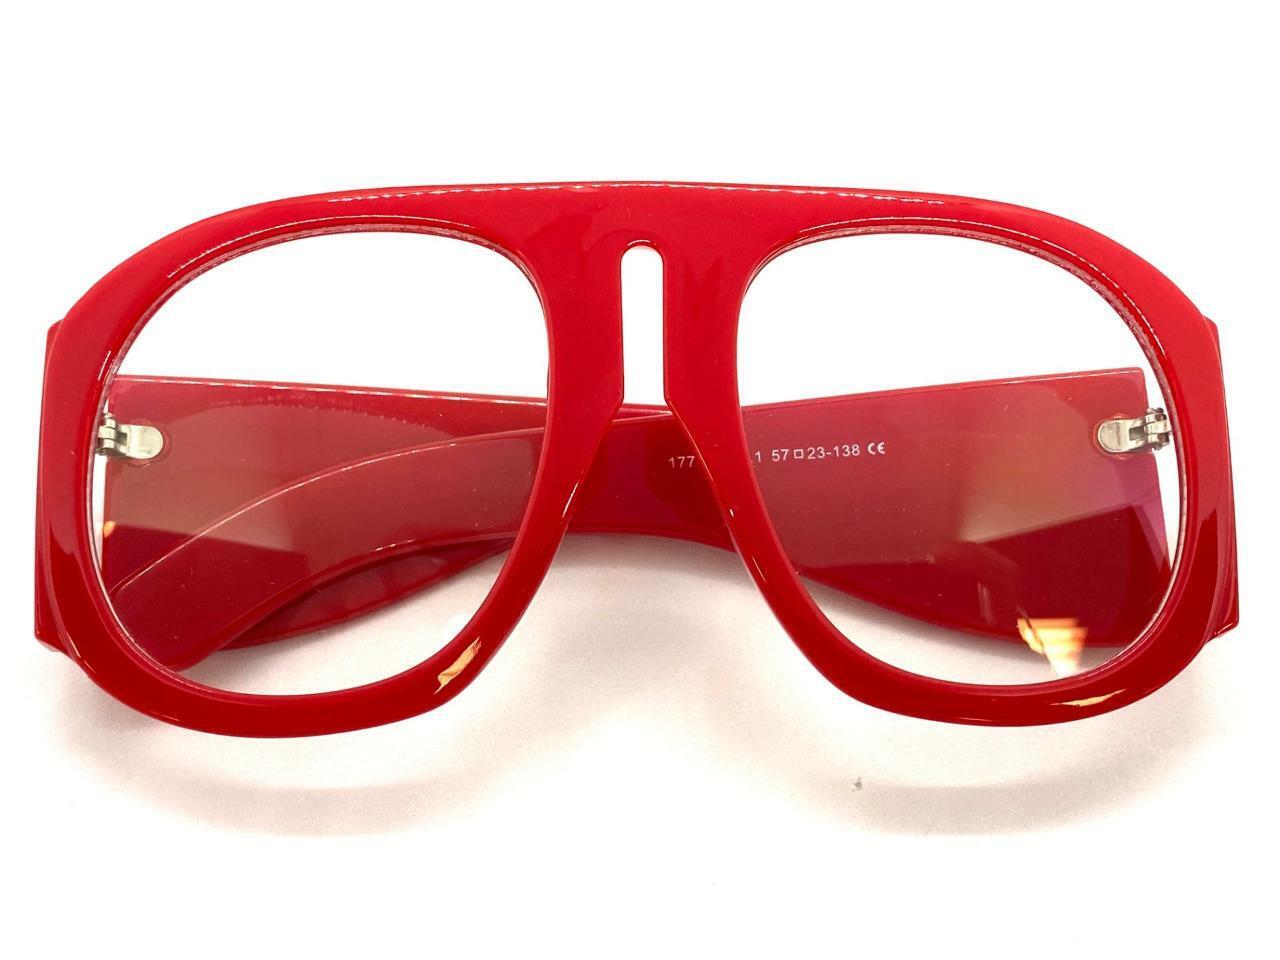 OVERSIZED EXAGGERATED Classic Retro Clear Lens EYE GLASSES Large Thick Red Frame